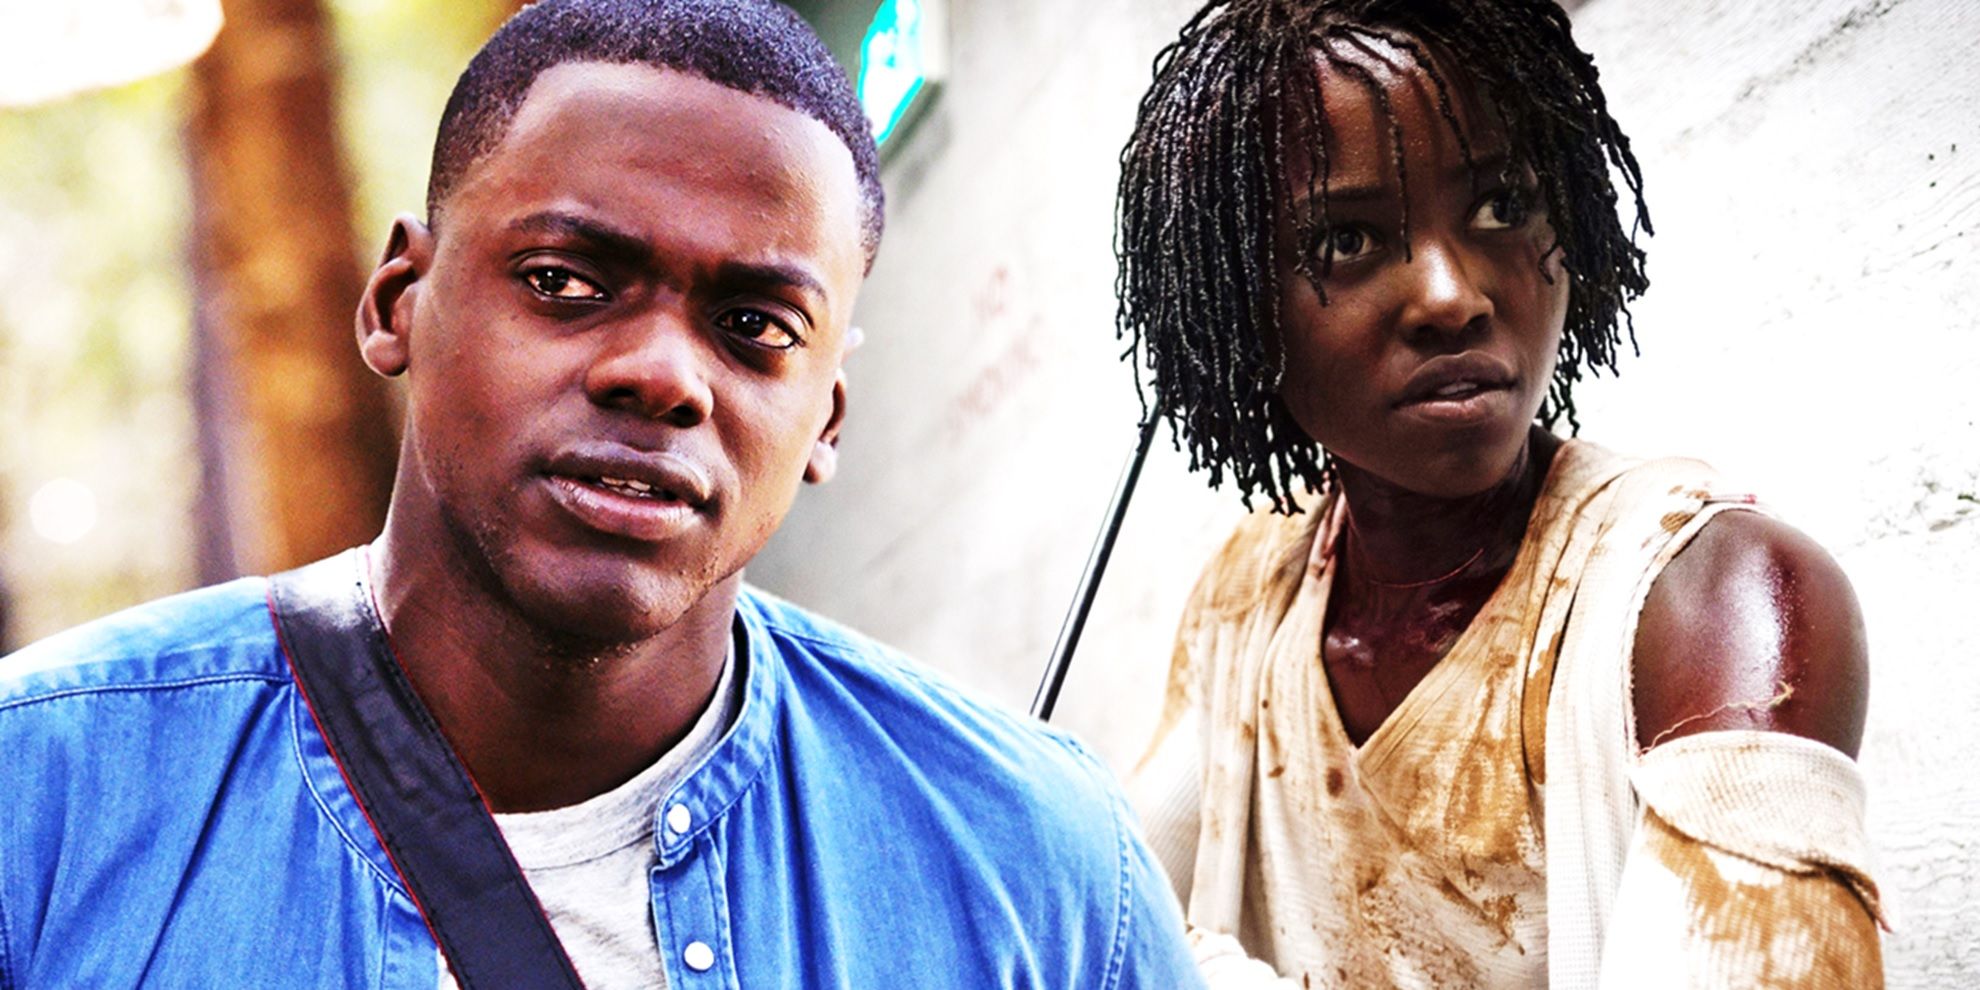 Collage of Daniel Kaluuya in Get Out and Lupita Nyong'o in Us